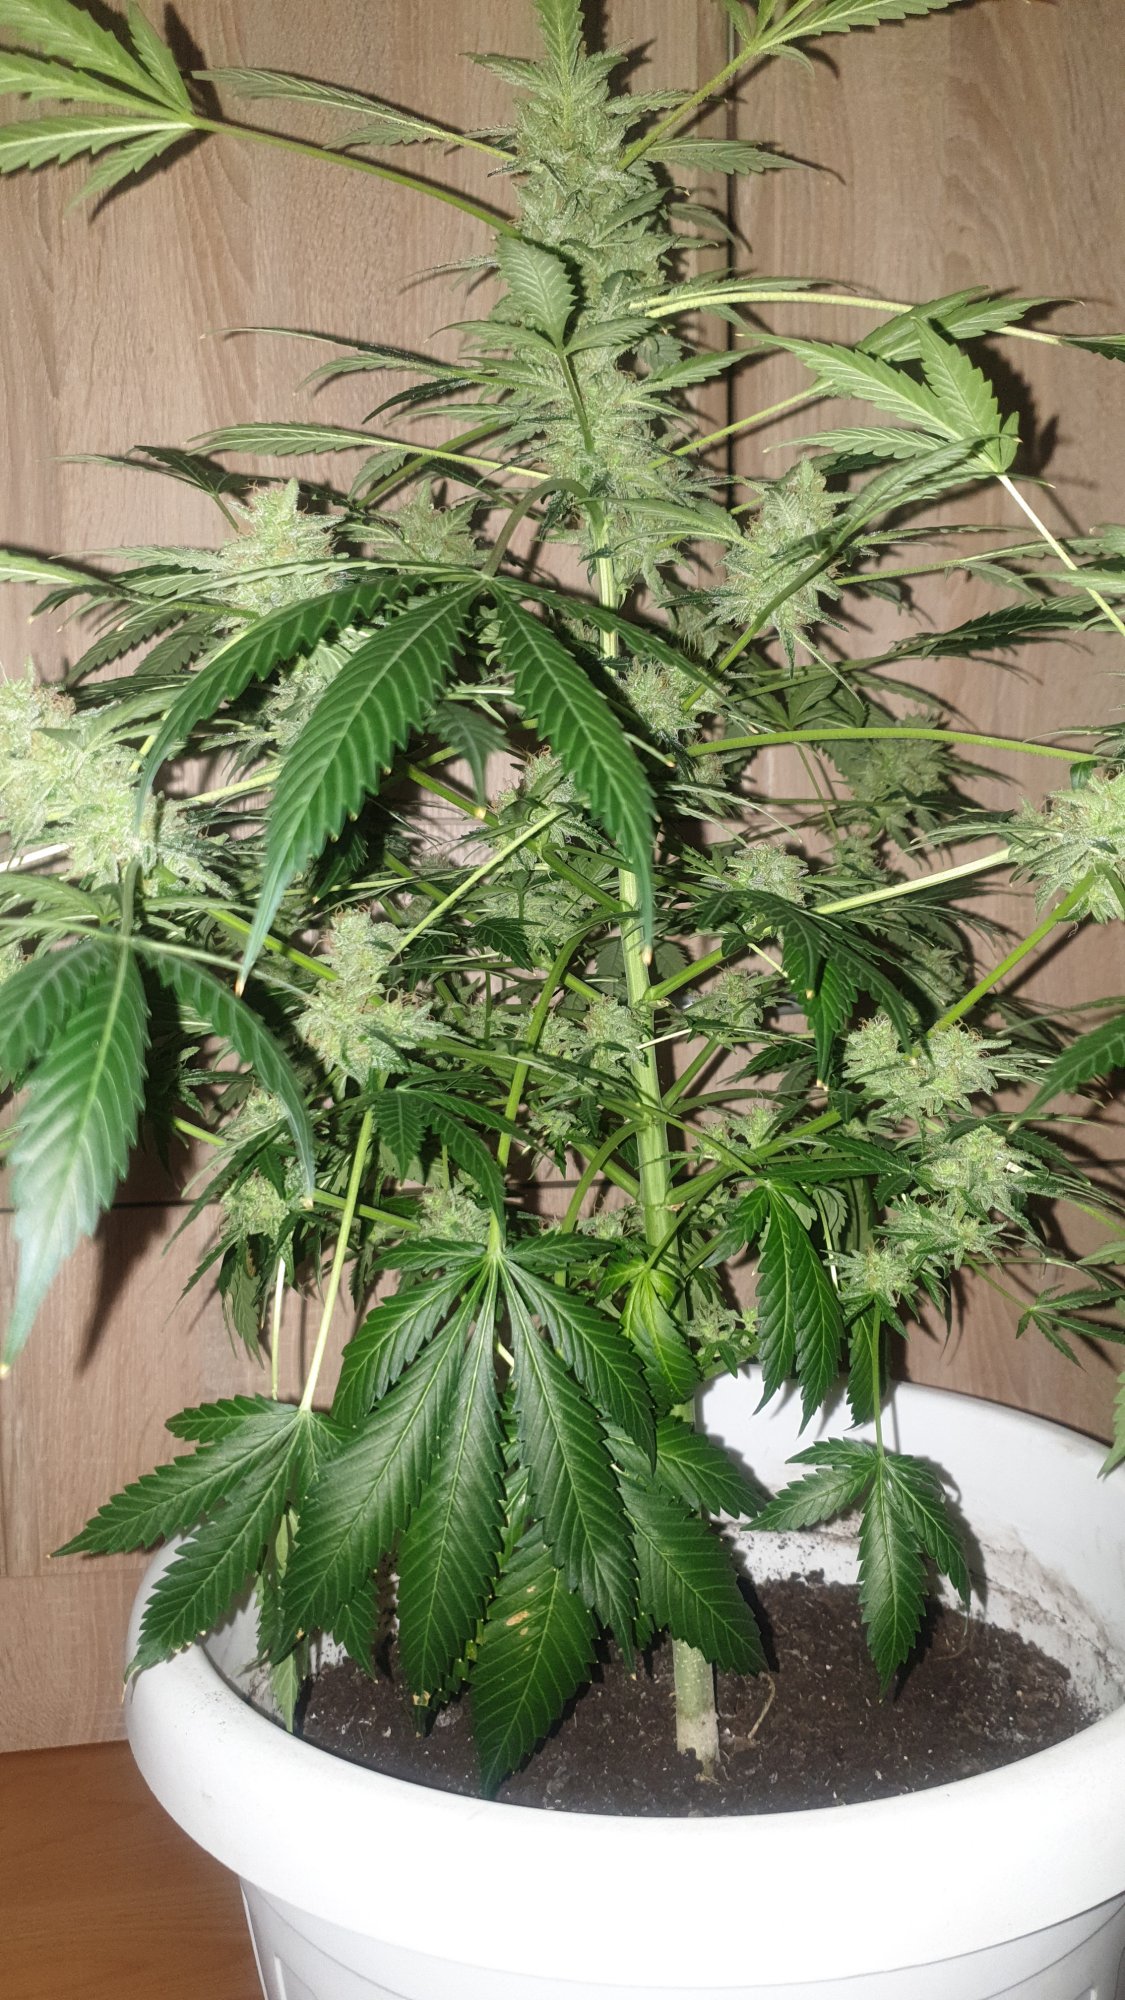 Can i harvest need help 9